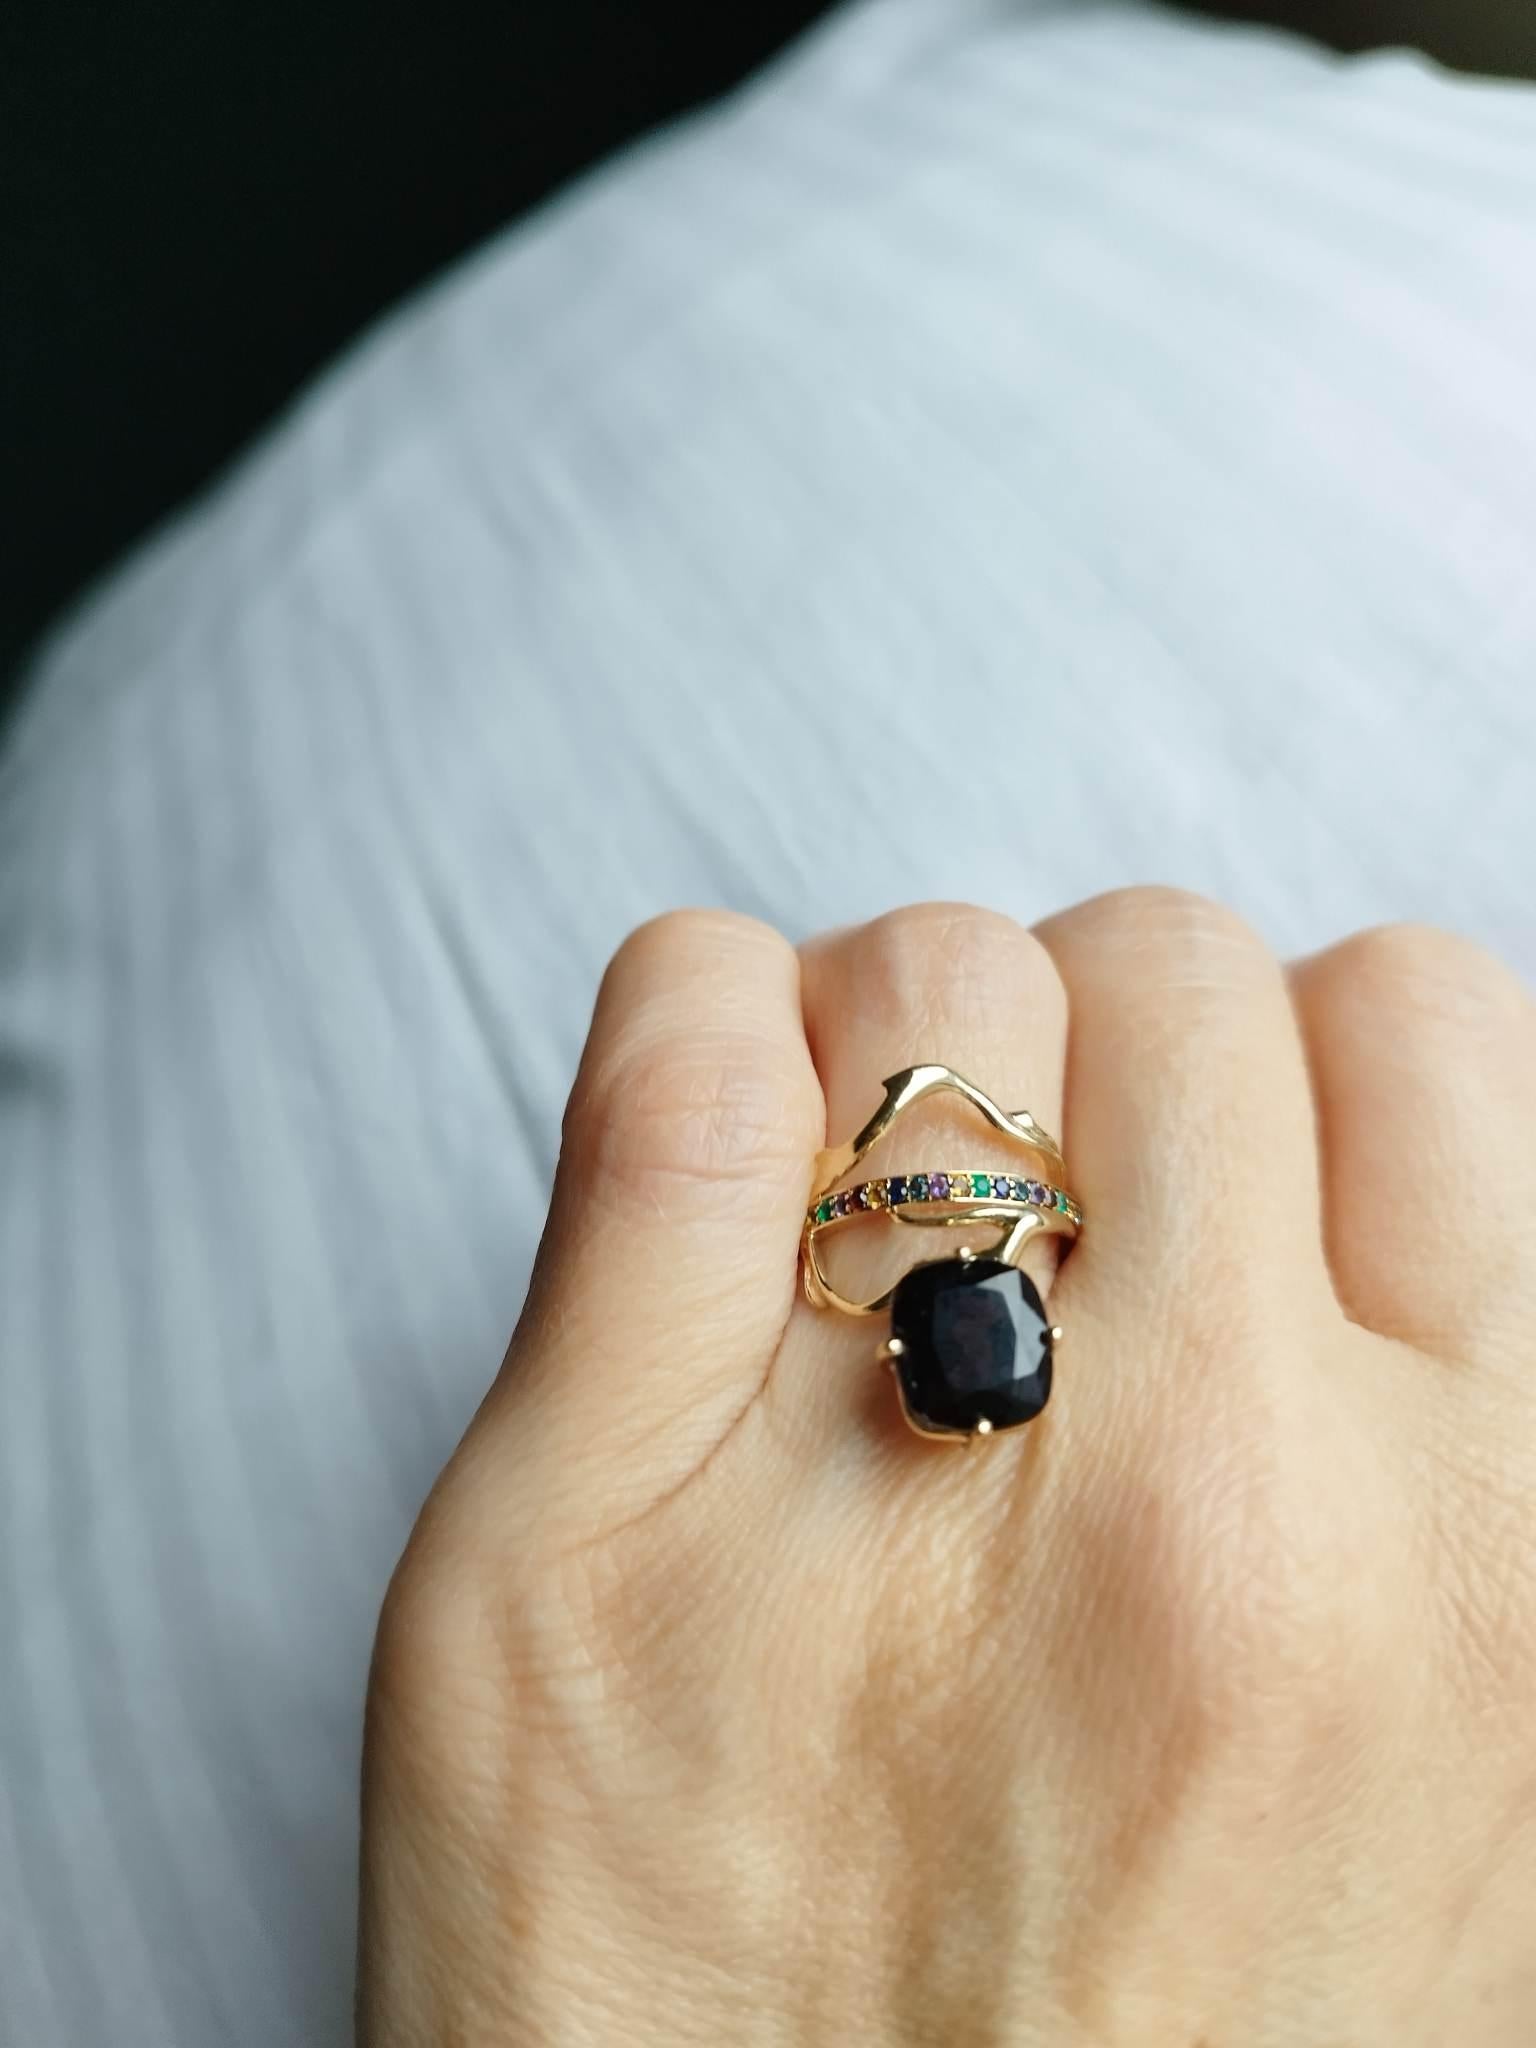 An unusual form makes this Tibetan 18 karat yellow gold contemporary dimensional ring an art object. It is encrusted with: colourful sapphires, diamonds, emeralds and cushion spinel (3-5 carats, dark purple or transparent lilac lavender up to your